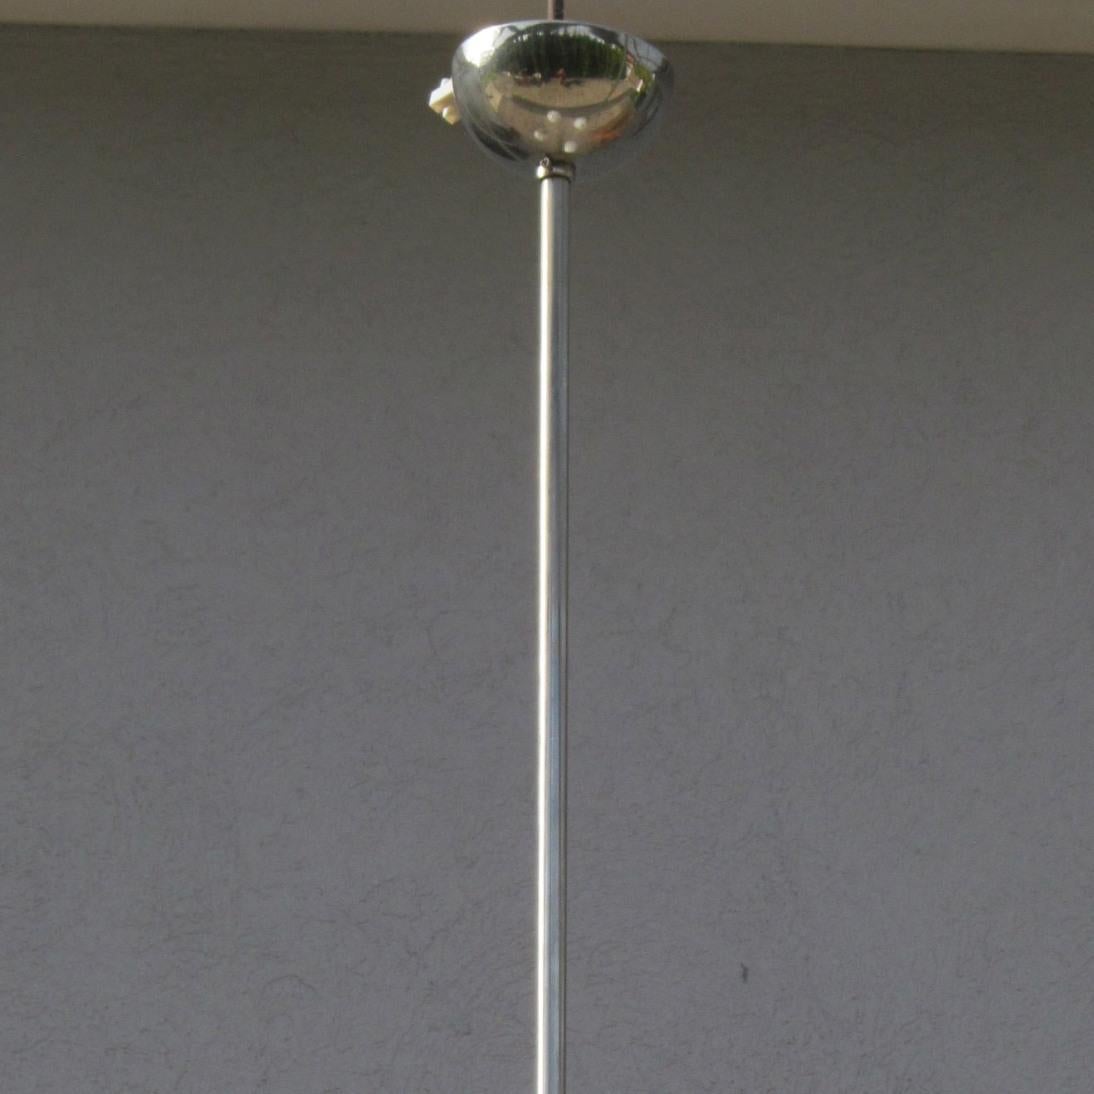 Early Bauhaus Four Opaline Sphere Lights Manji Shaped Chandelier, Germany, 1920s For Sale 12